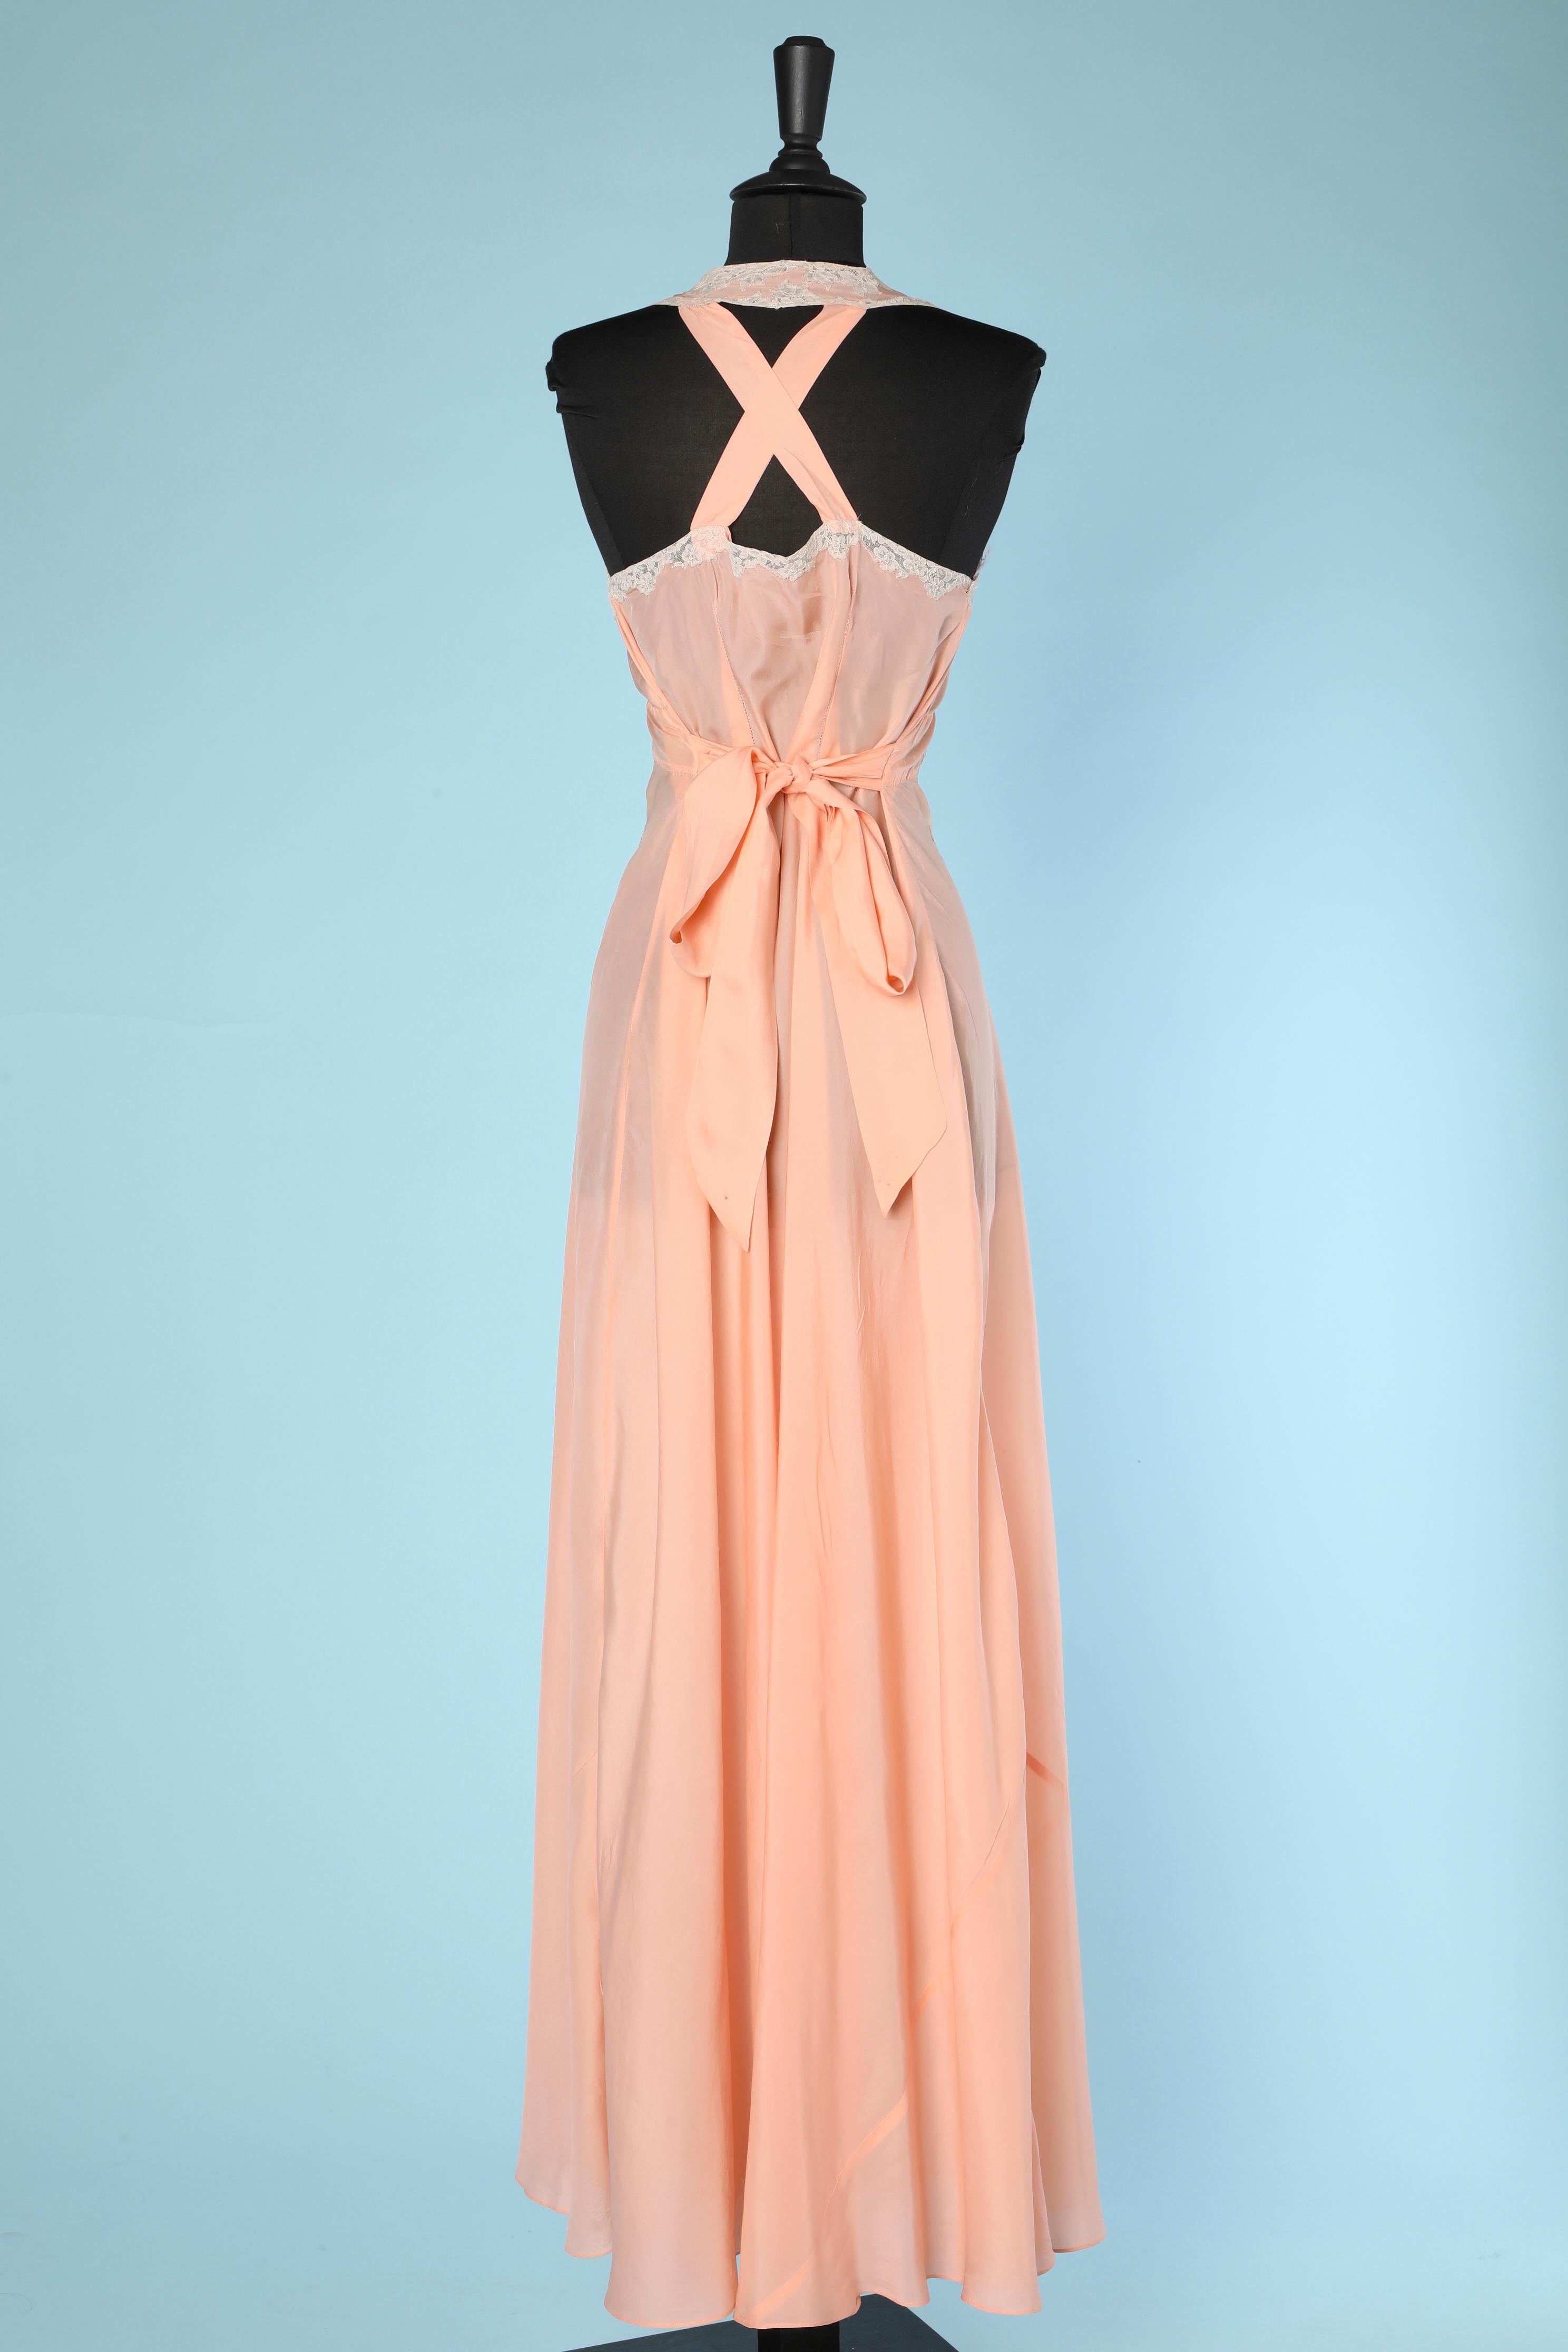 Women's Pale pink silk and lace sleeping gown Circa 1930